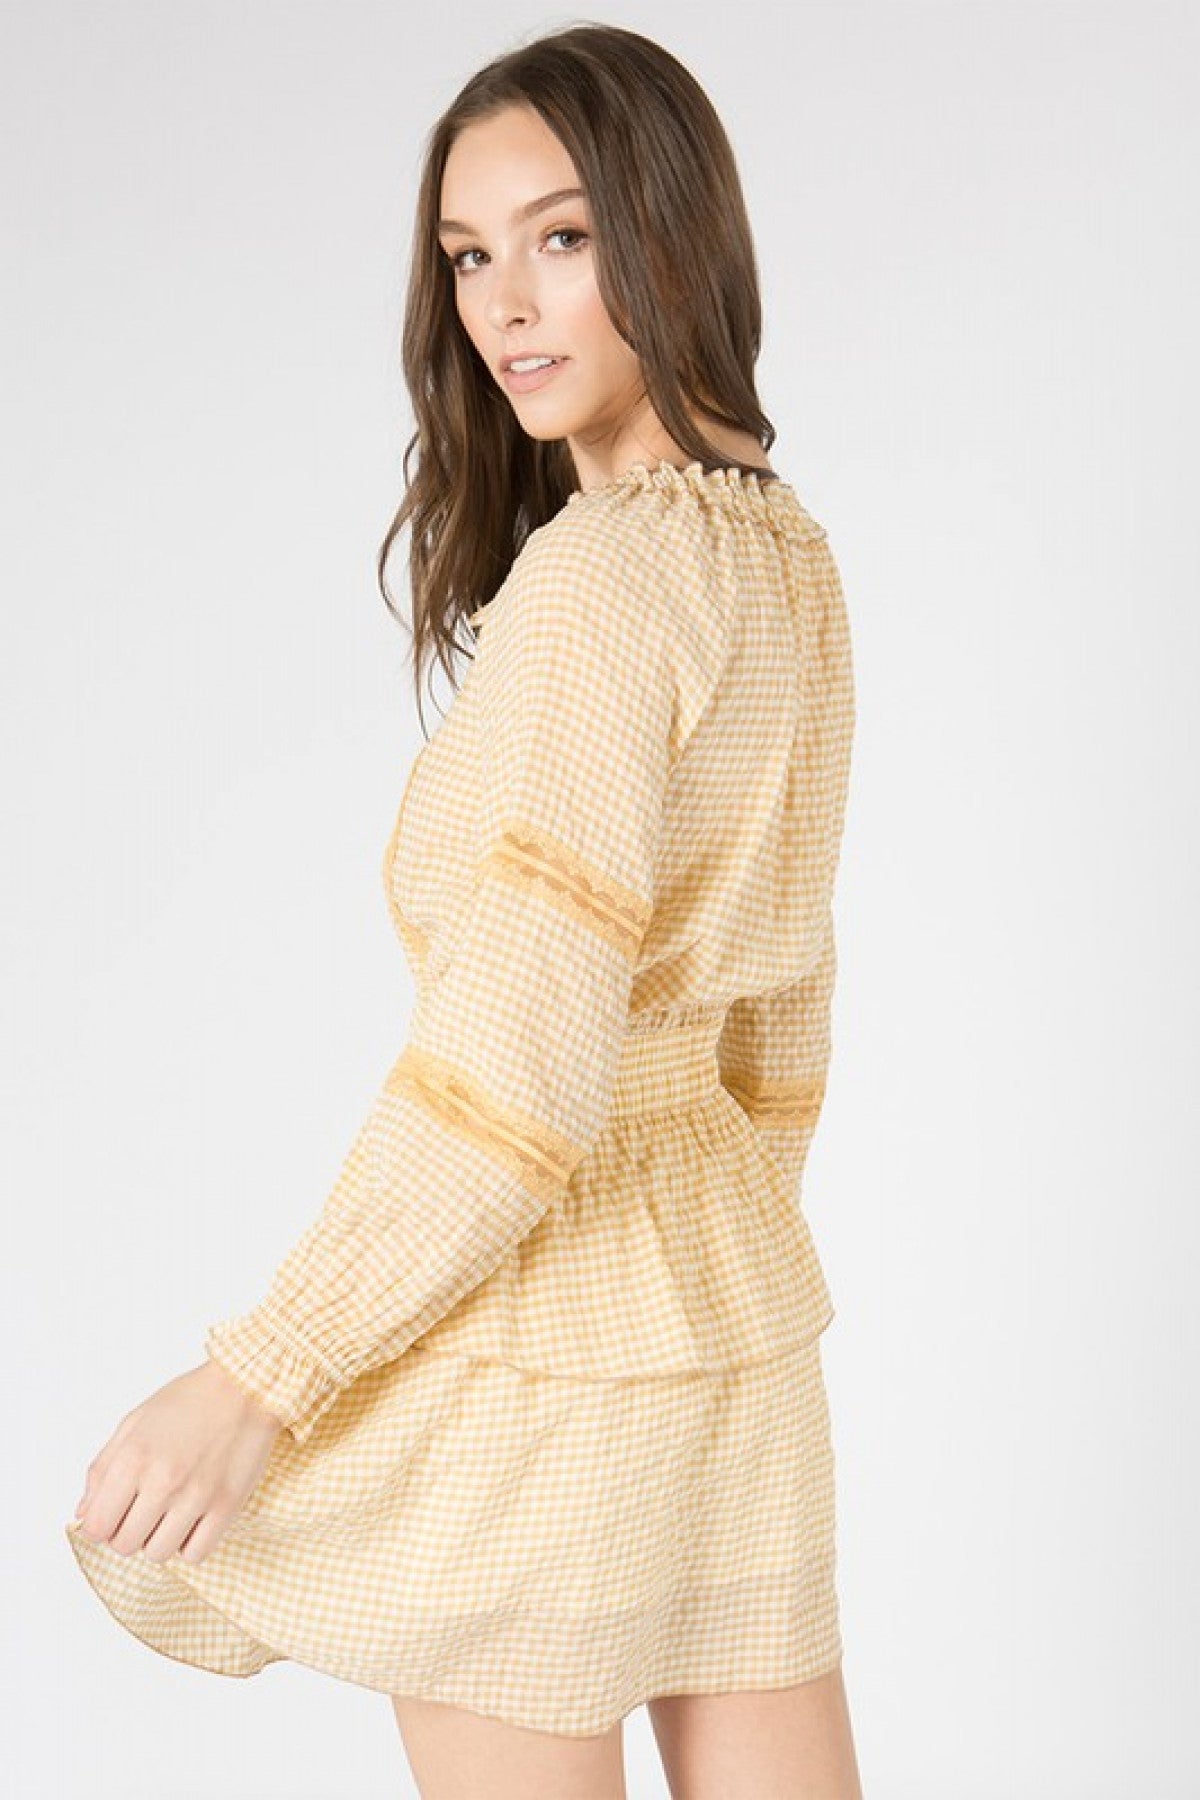 MUSTARD DRAW STRING NECK DETAIL STRETCH WAIST LONG SLEEVE MINI DRESS (NOW $3.00 ONLY!)